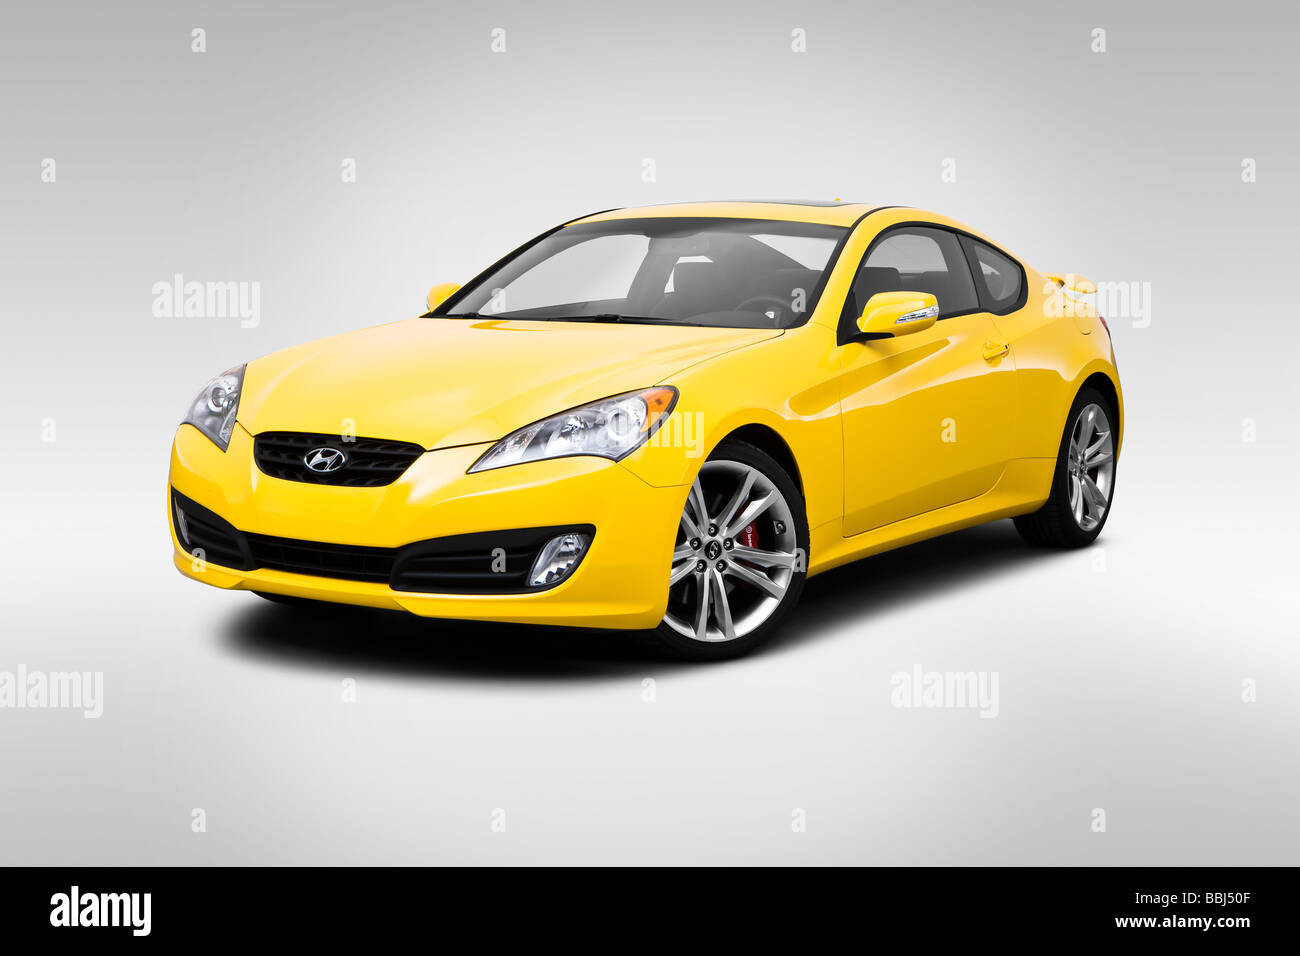 2010 Hyundai Genesis 3.8 Track in Yellow - Front angle view Stock Photo